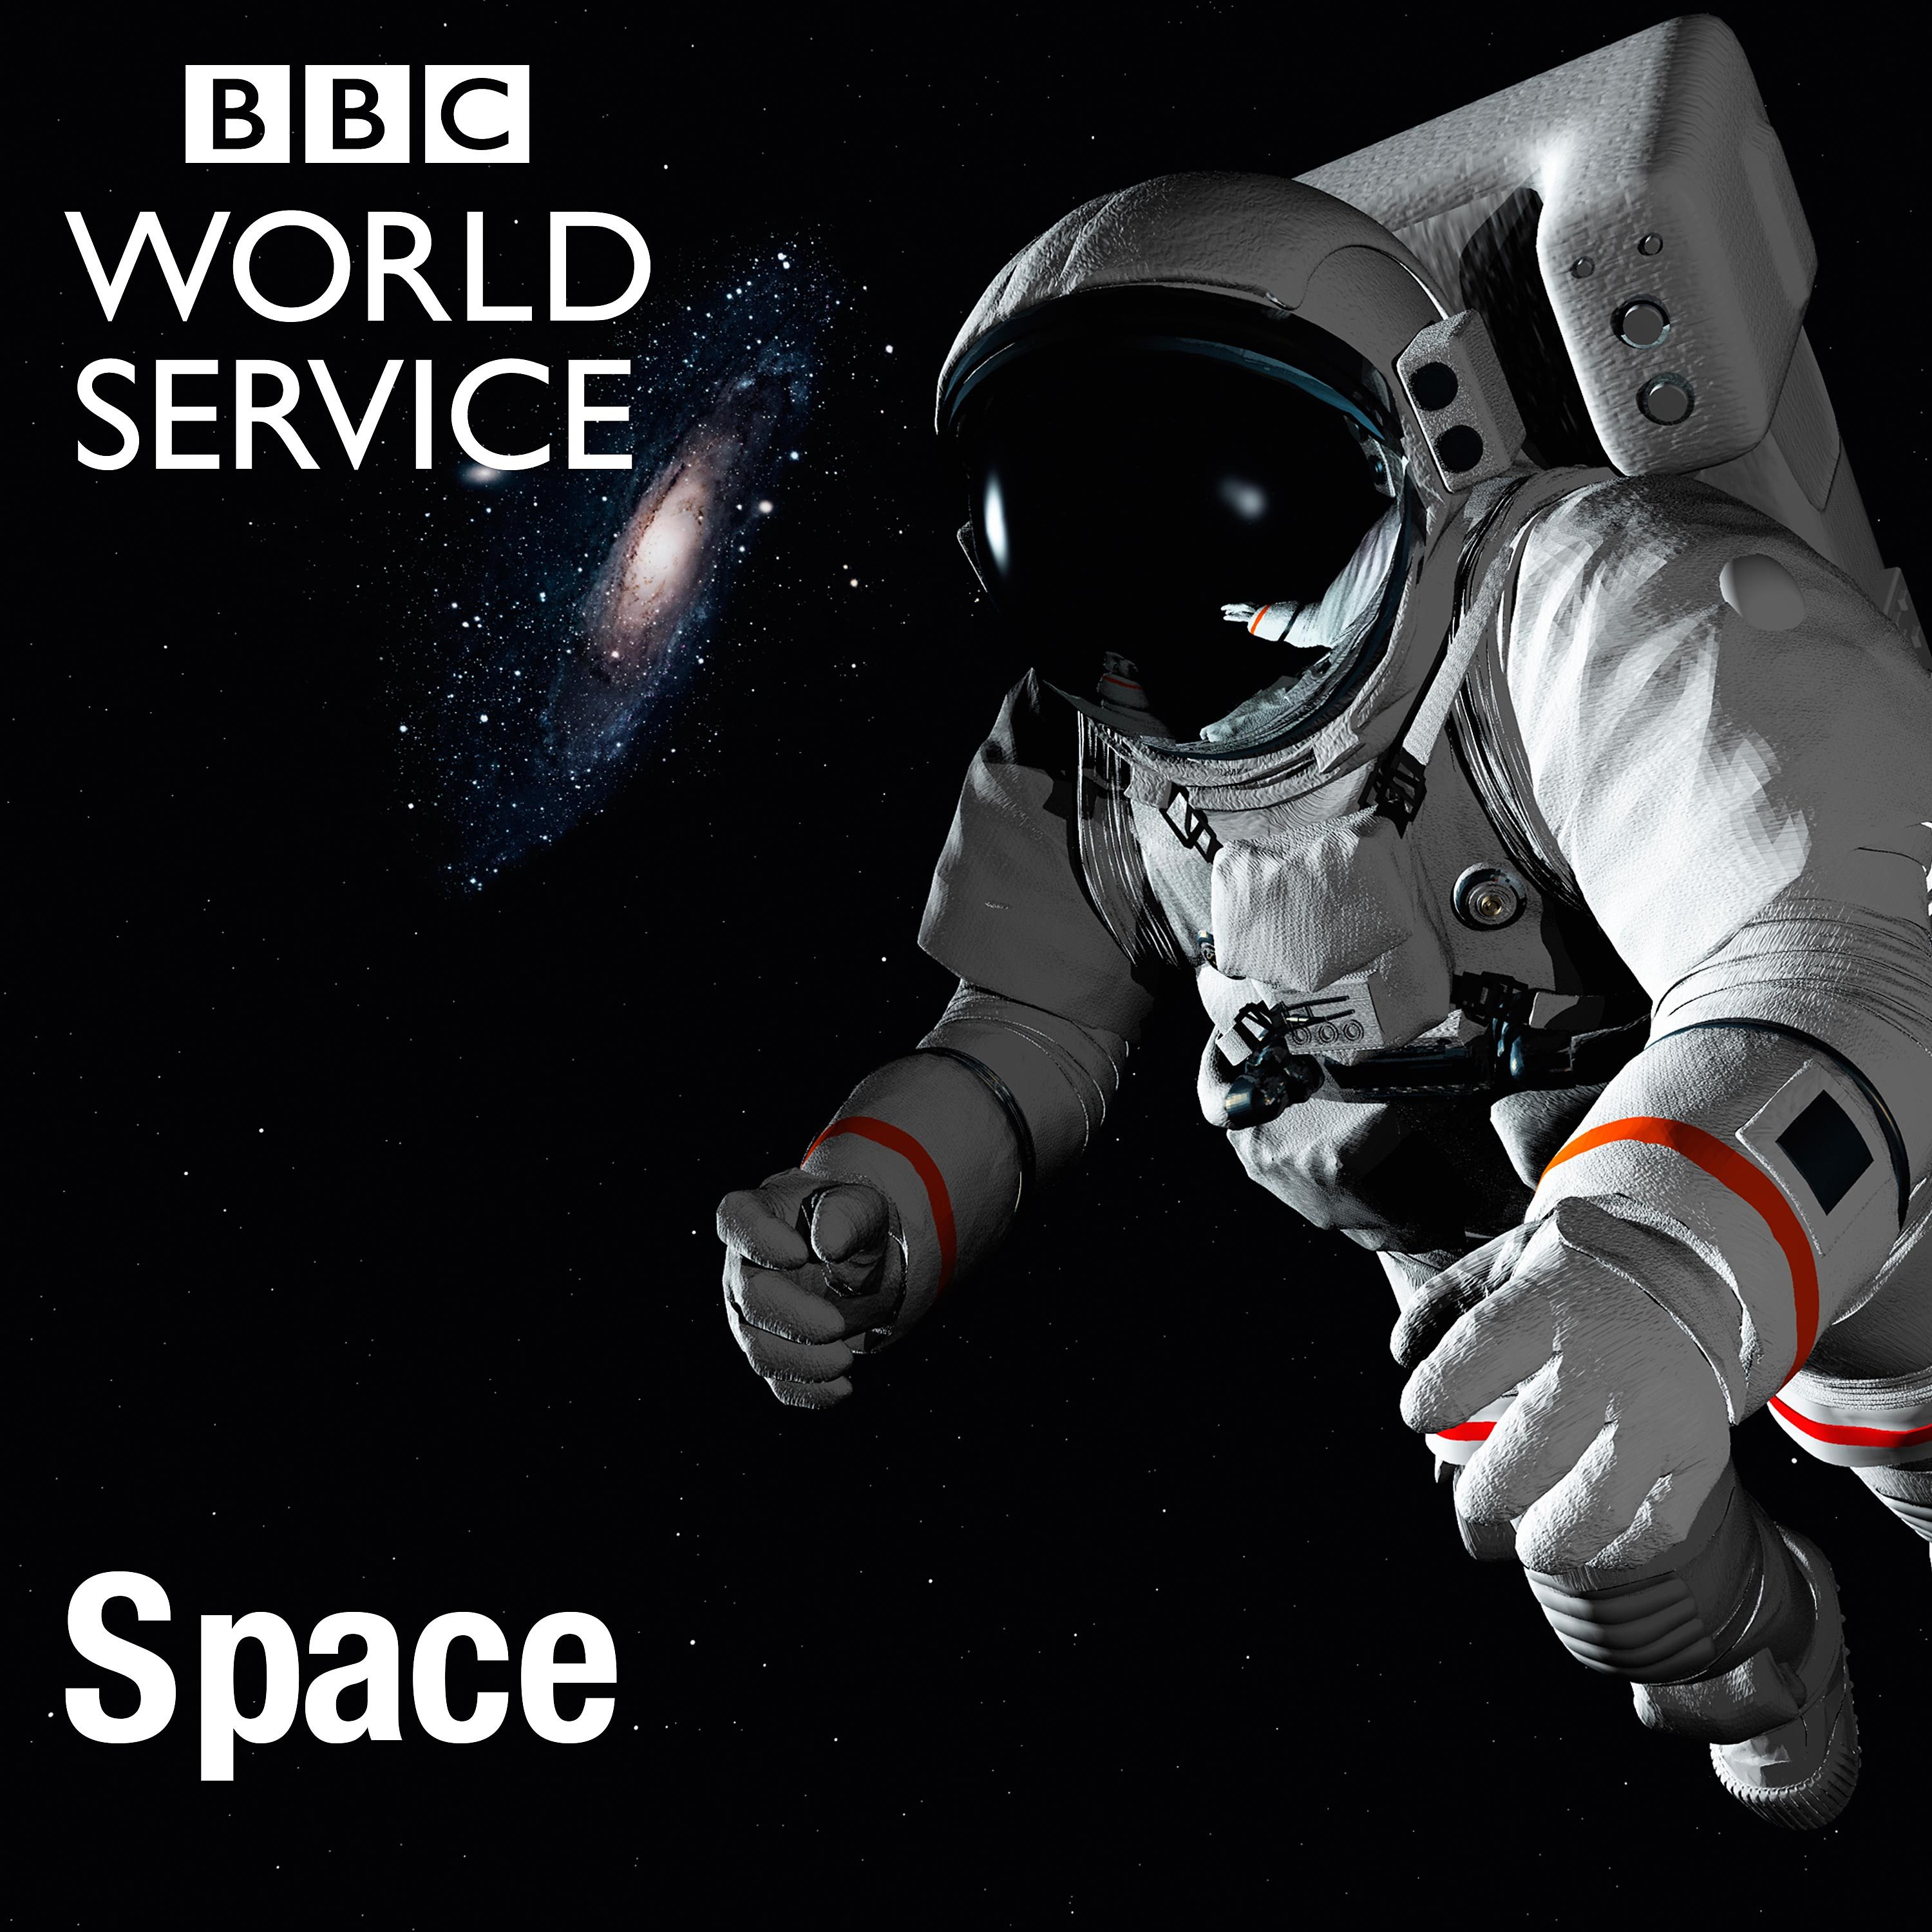 'I Nearly Drowned in Space'